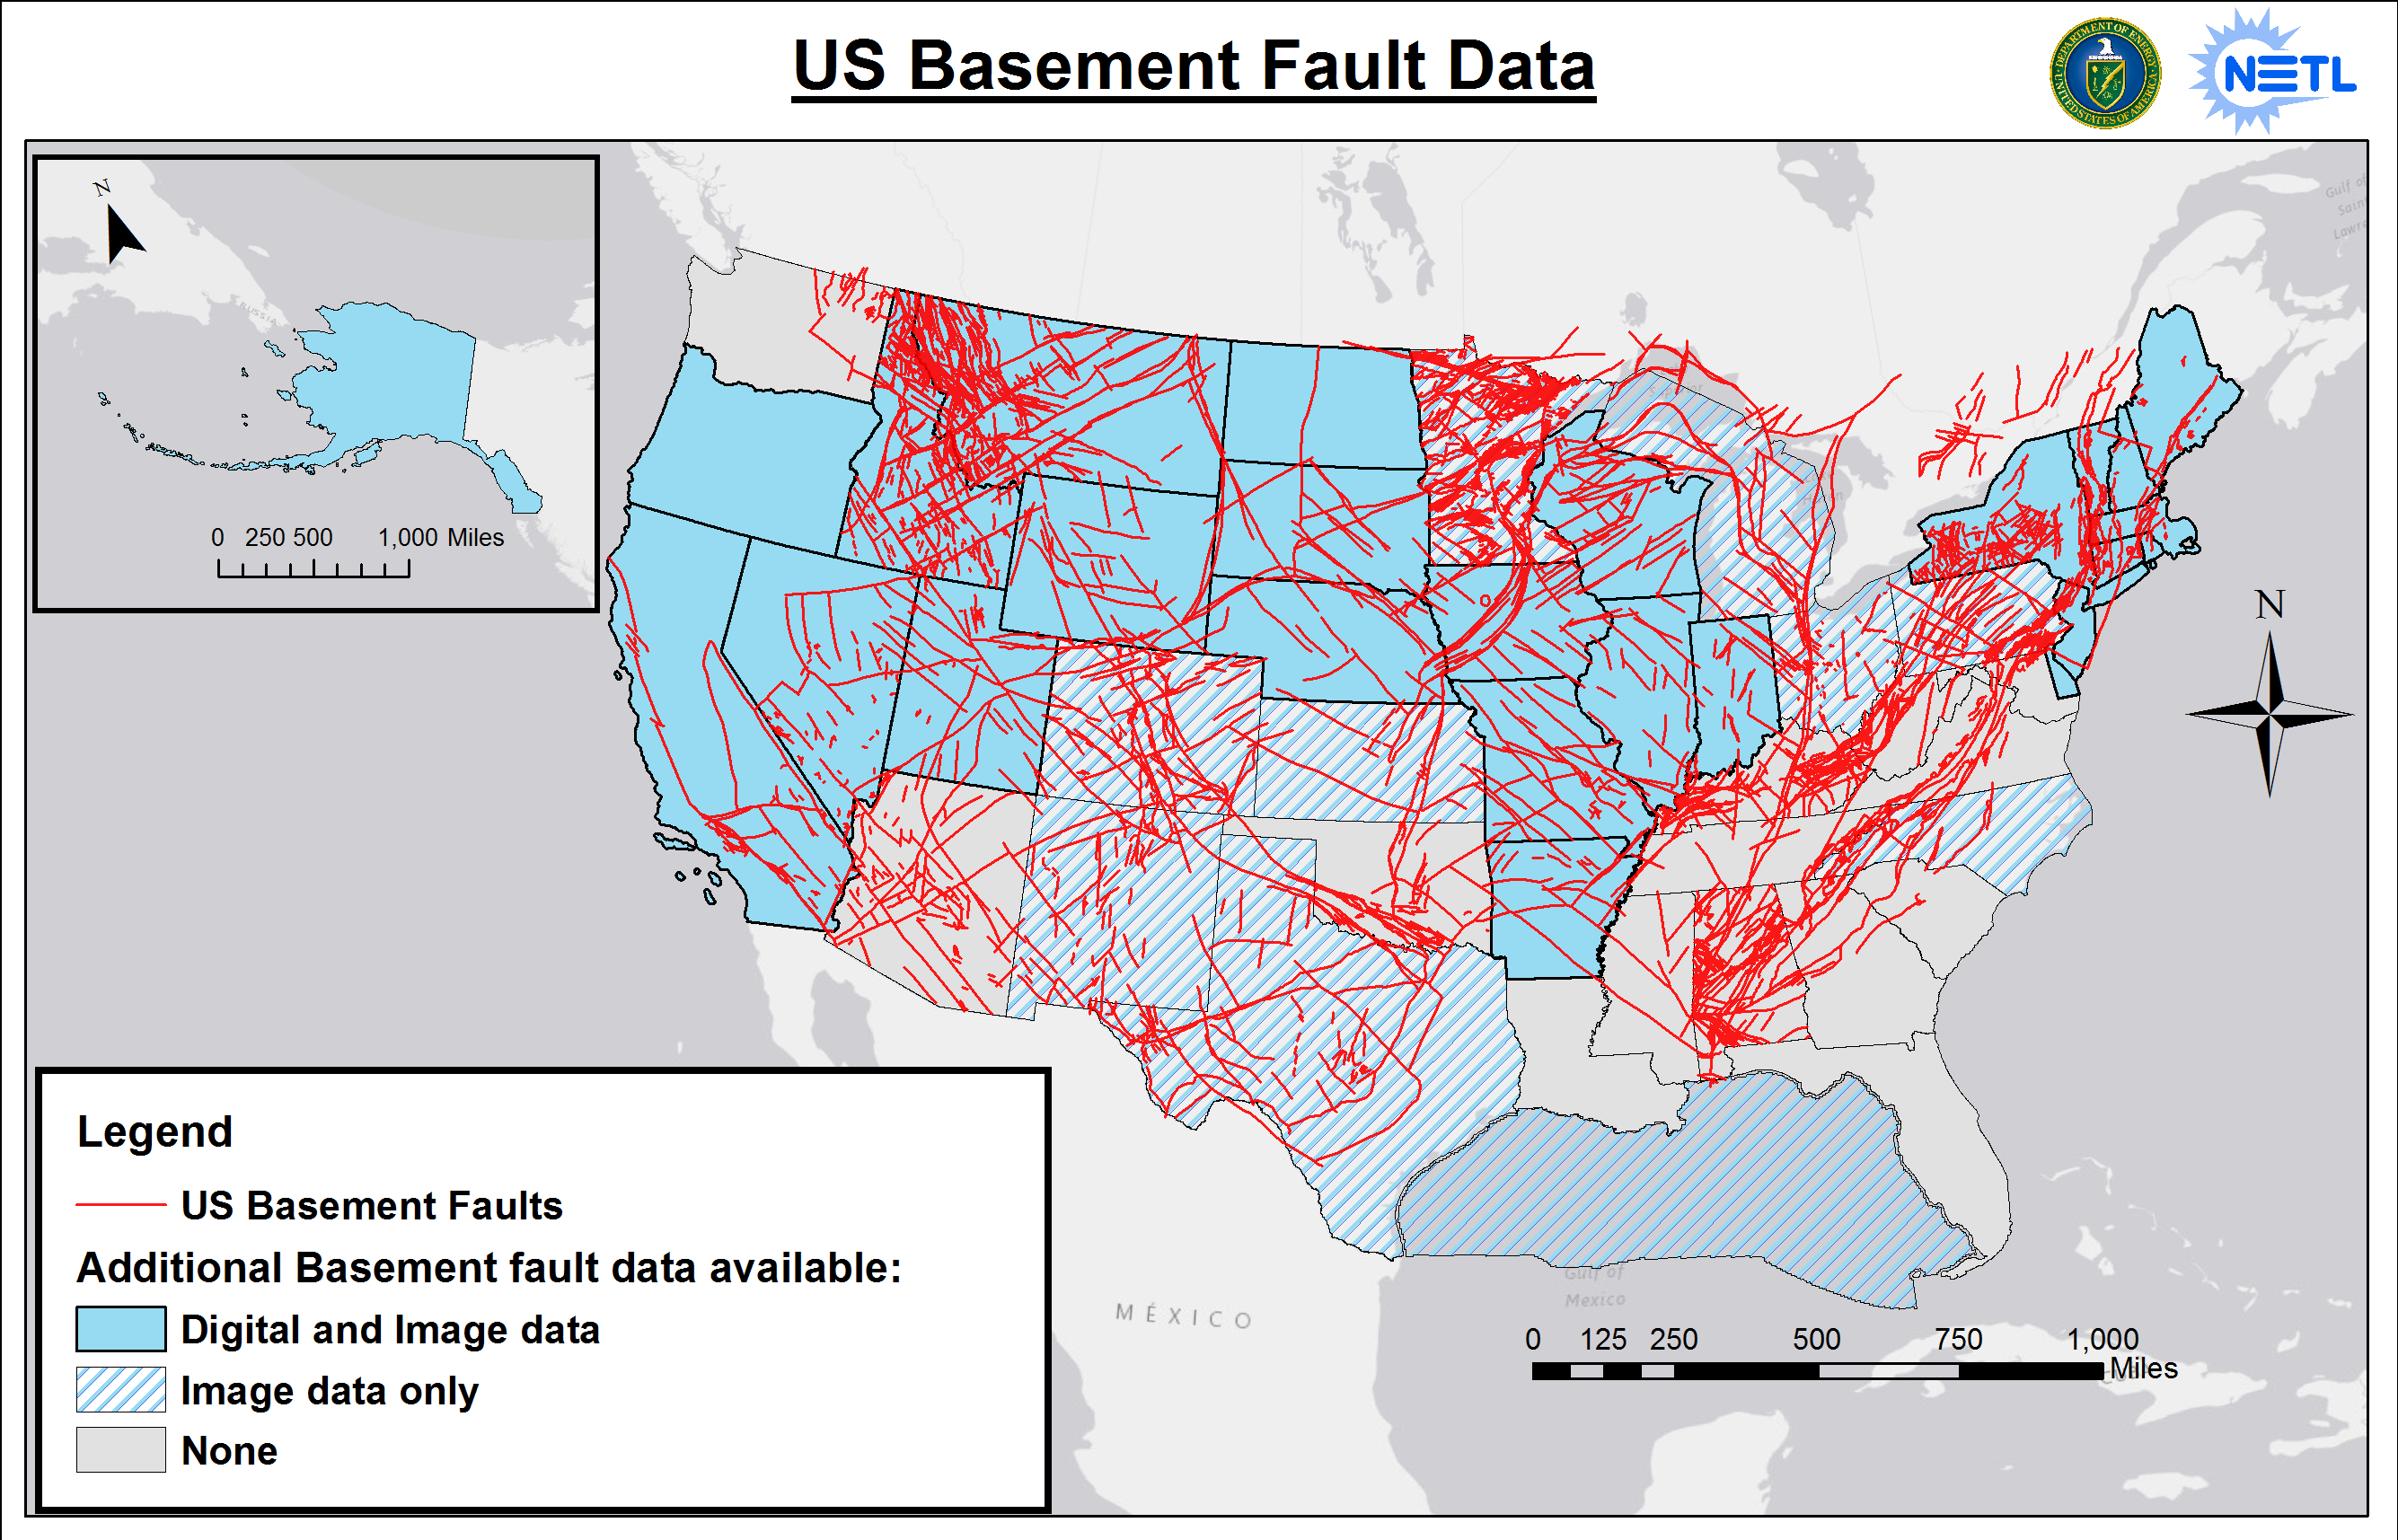 Earthquake Fault Lines Across The United States The Earth Images 